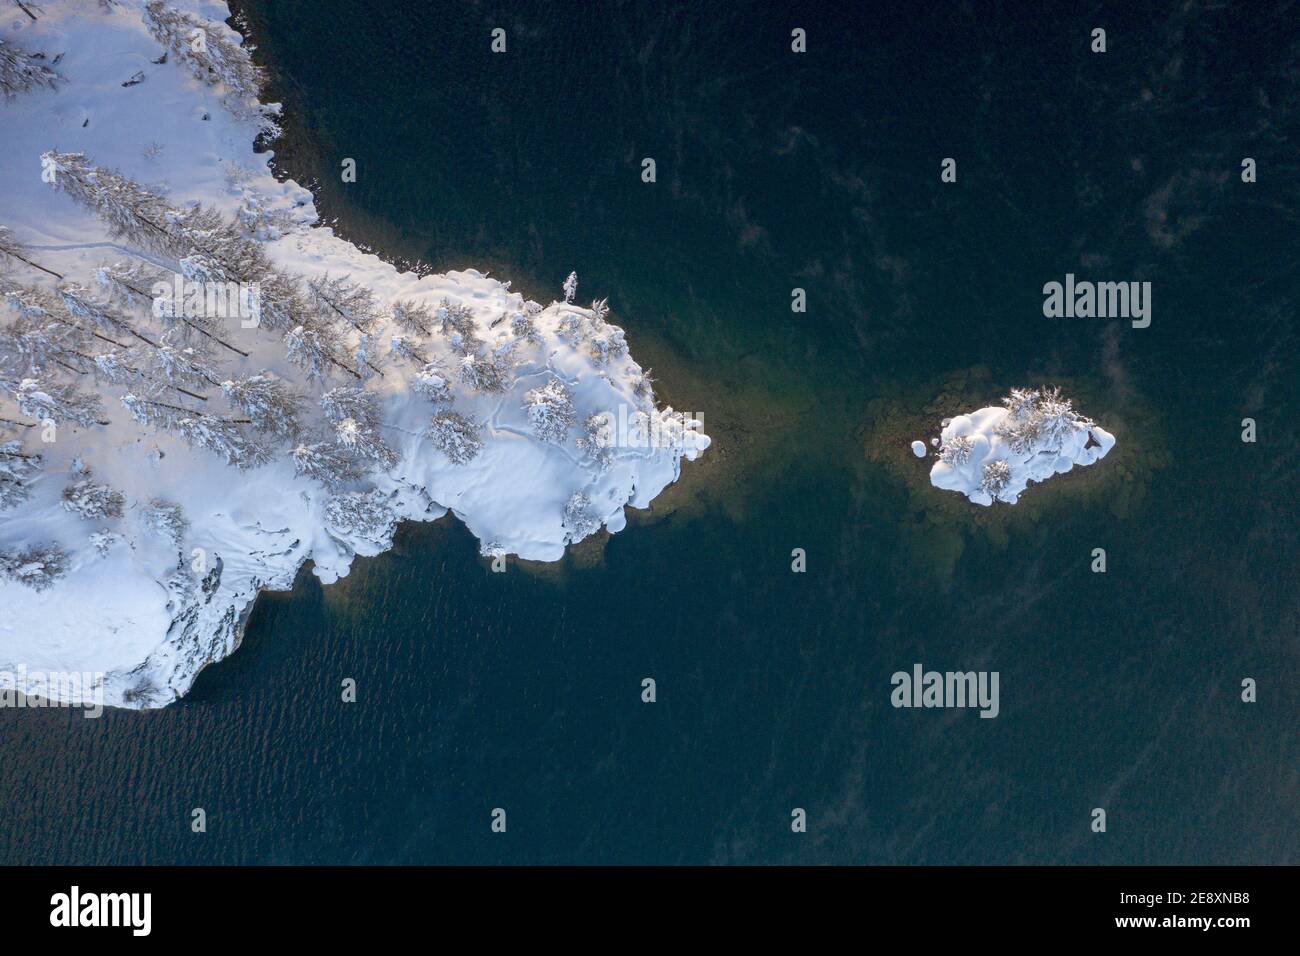 Aerial view of frozen islet and snowy woods on shore of icy Lake Sils, Switzerland Stock Photo